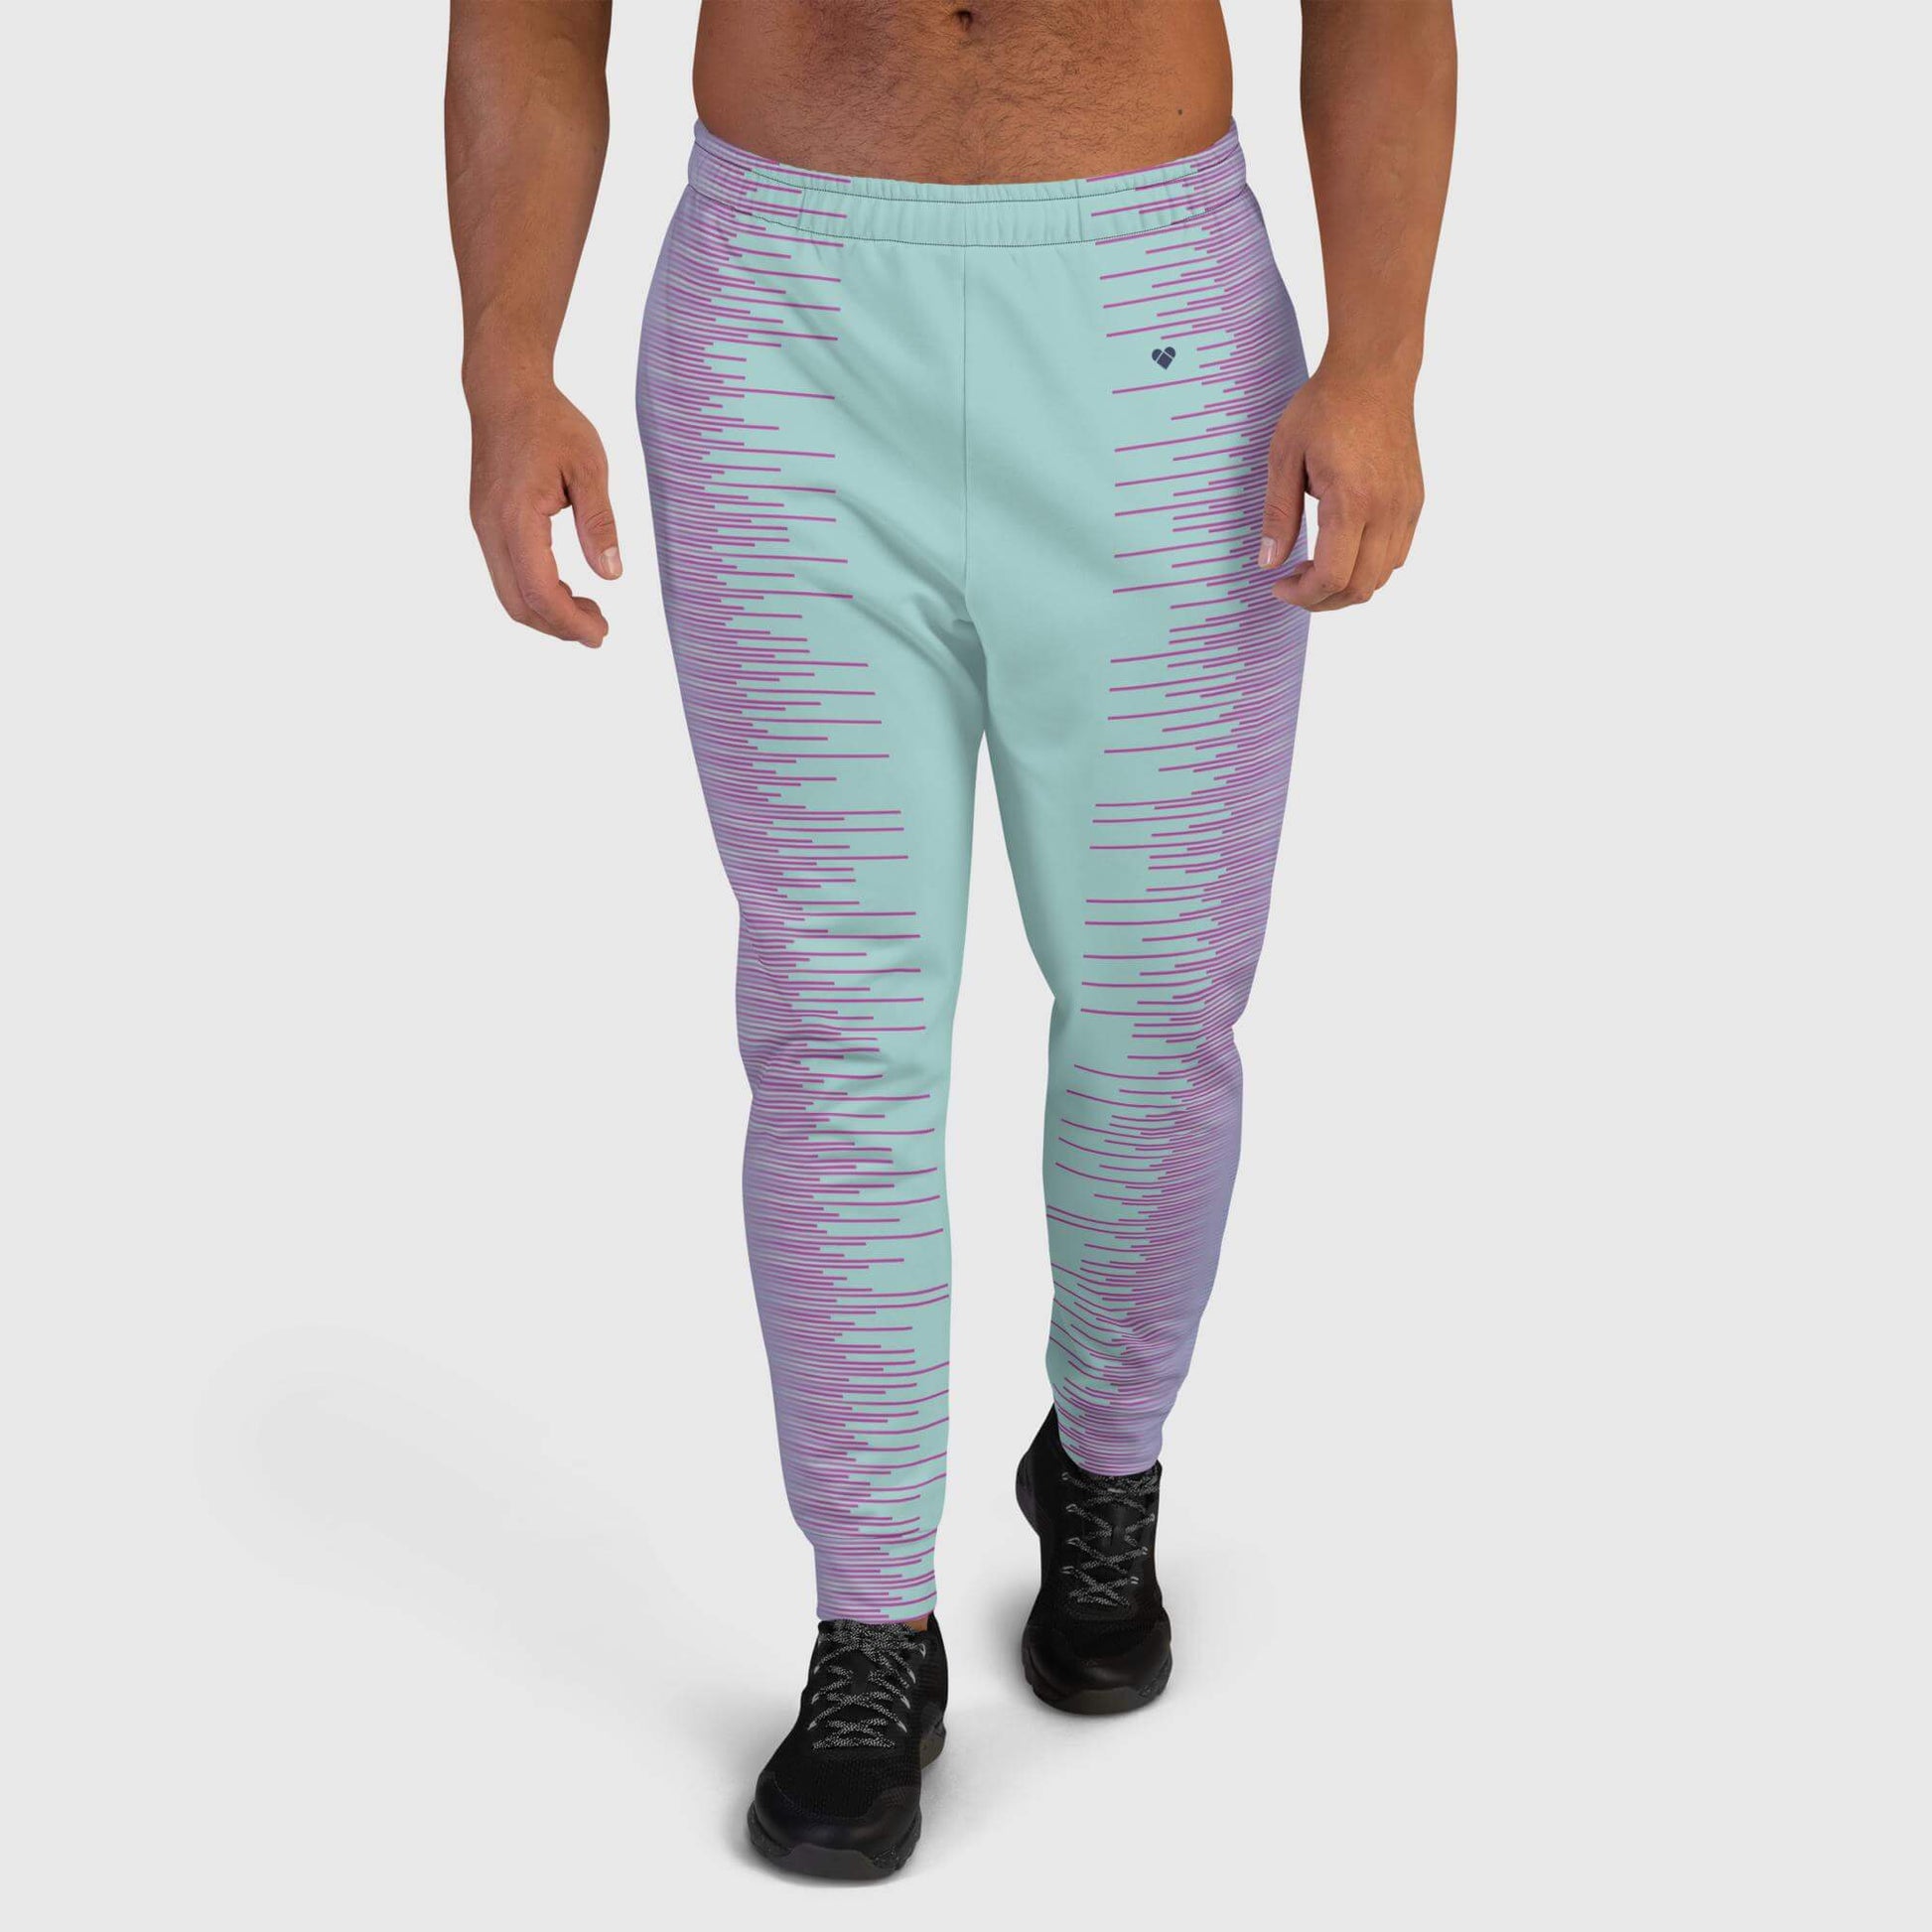 Mint Dual Joggers for Men from CRiZ AMOR's Amor Dual Collection